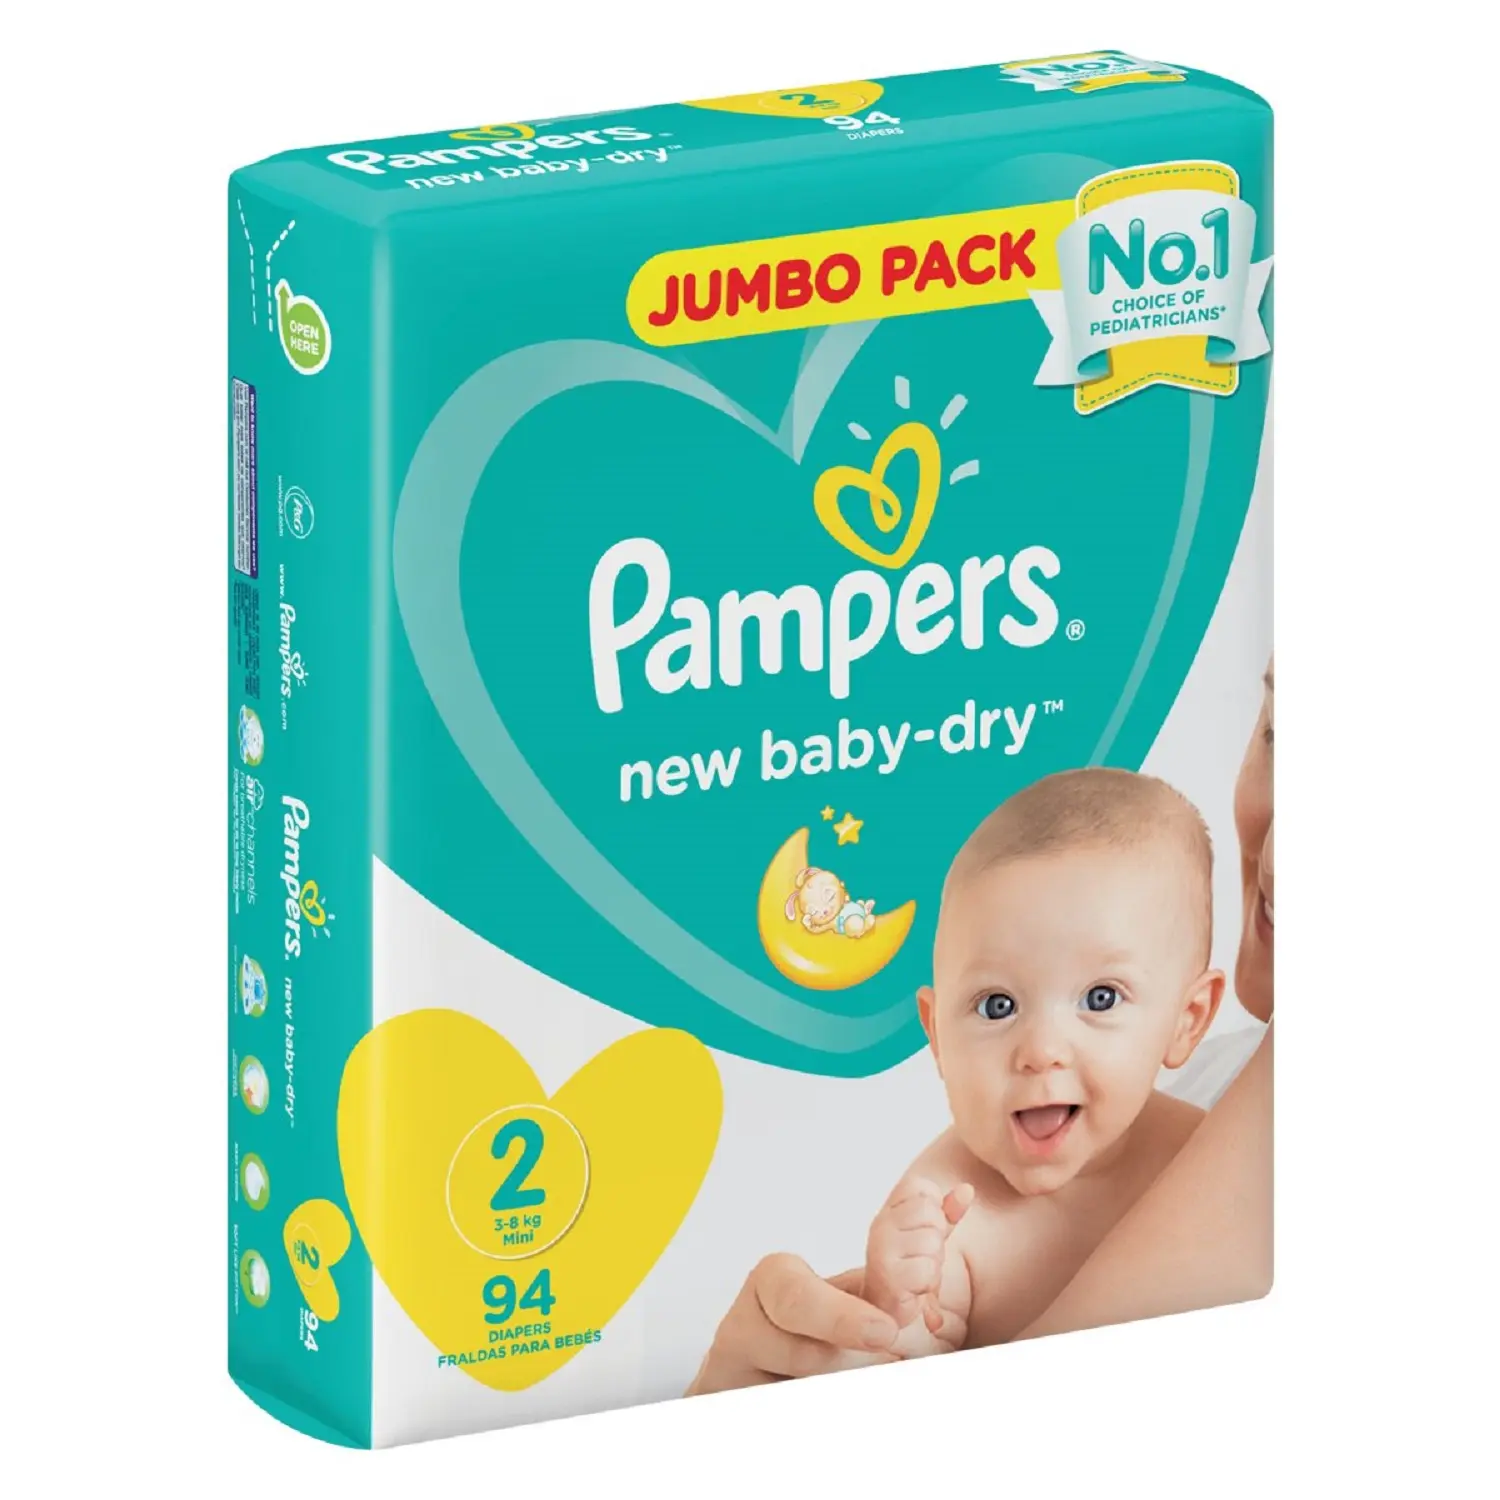 USA Original Quality Pampers - Baby Diapers High Absorbency Disposable Baby Diapers Wholesale